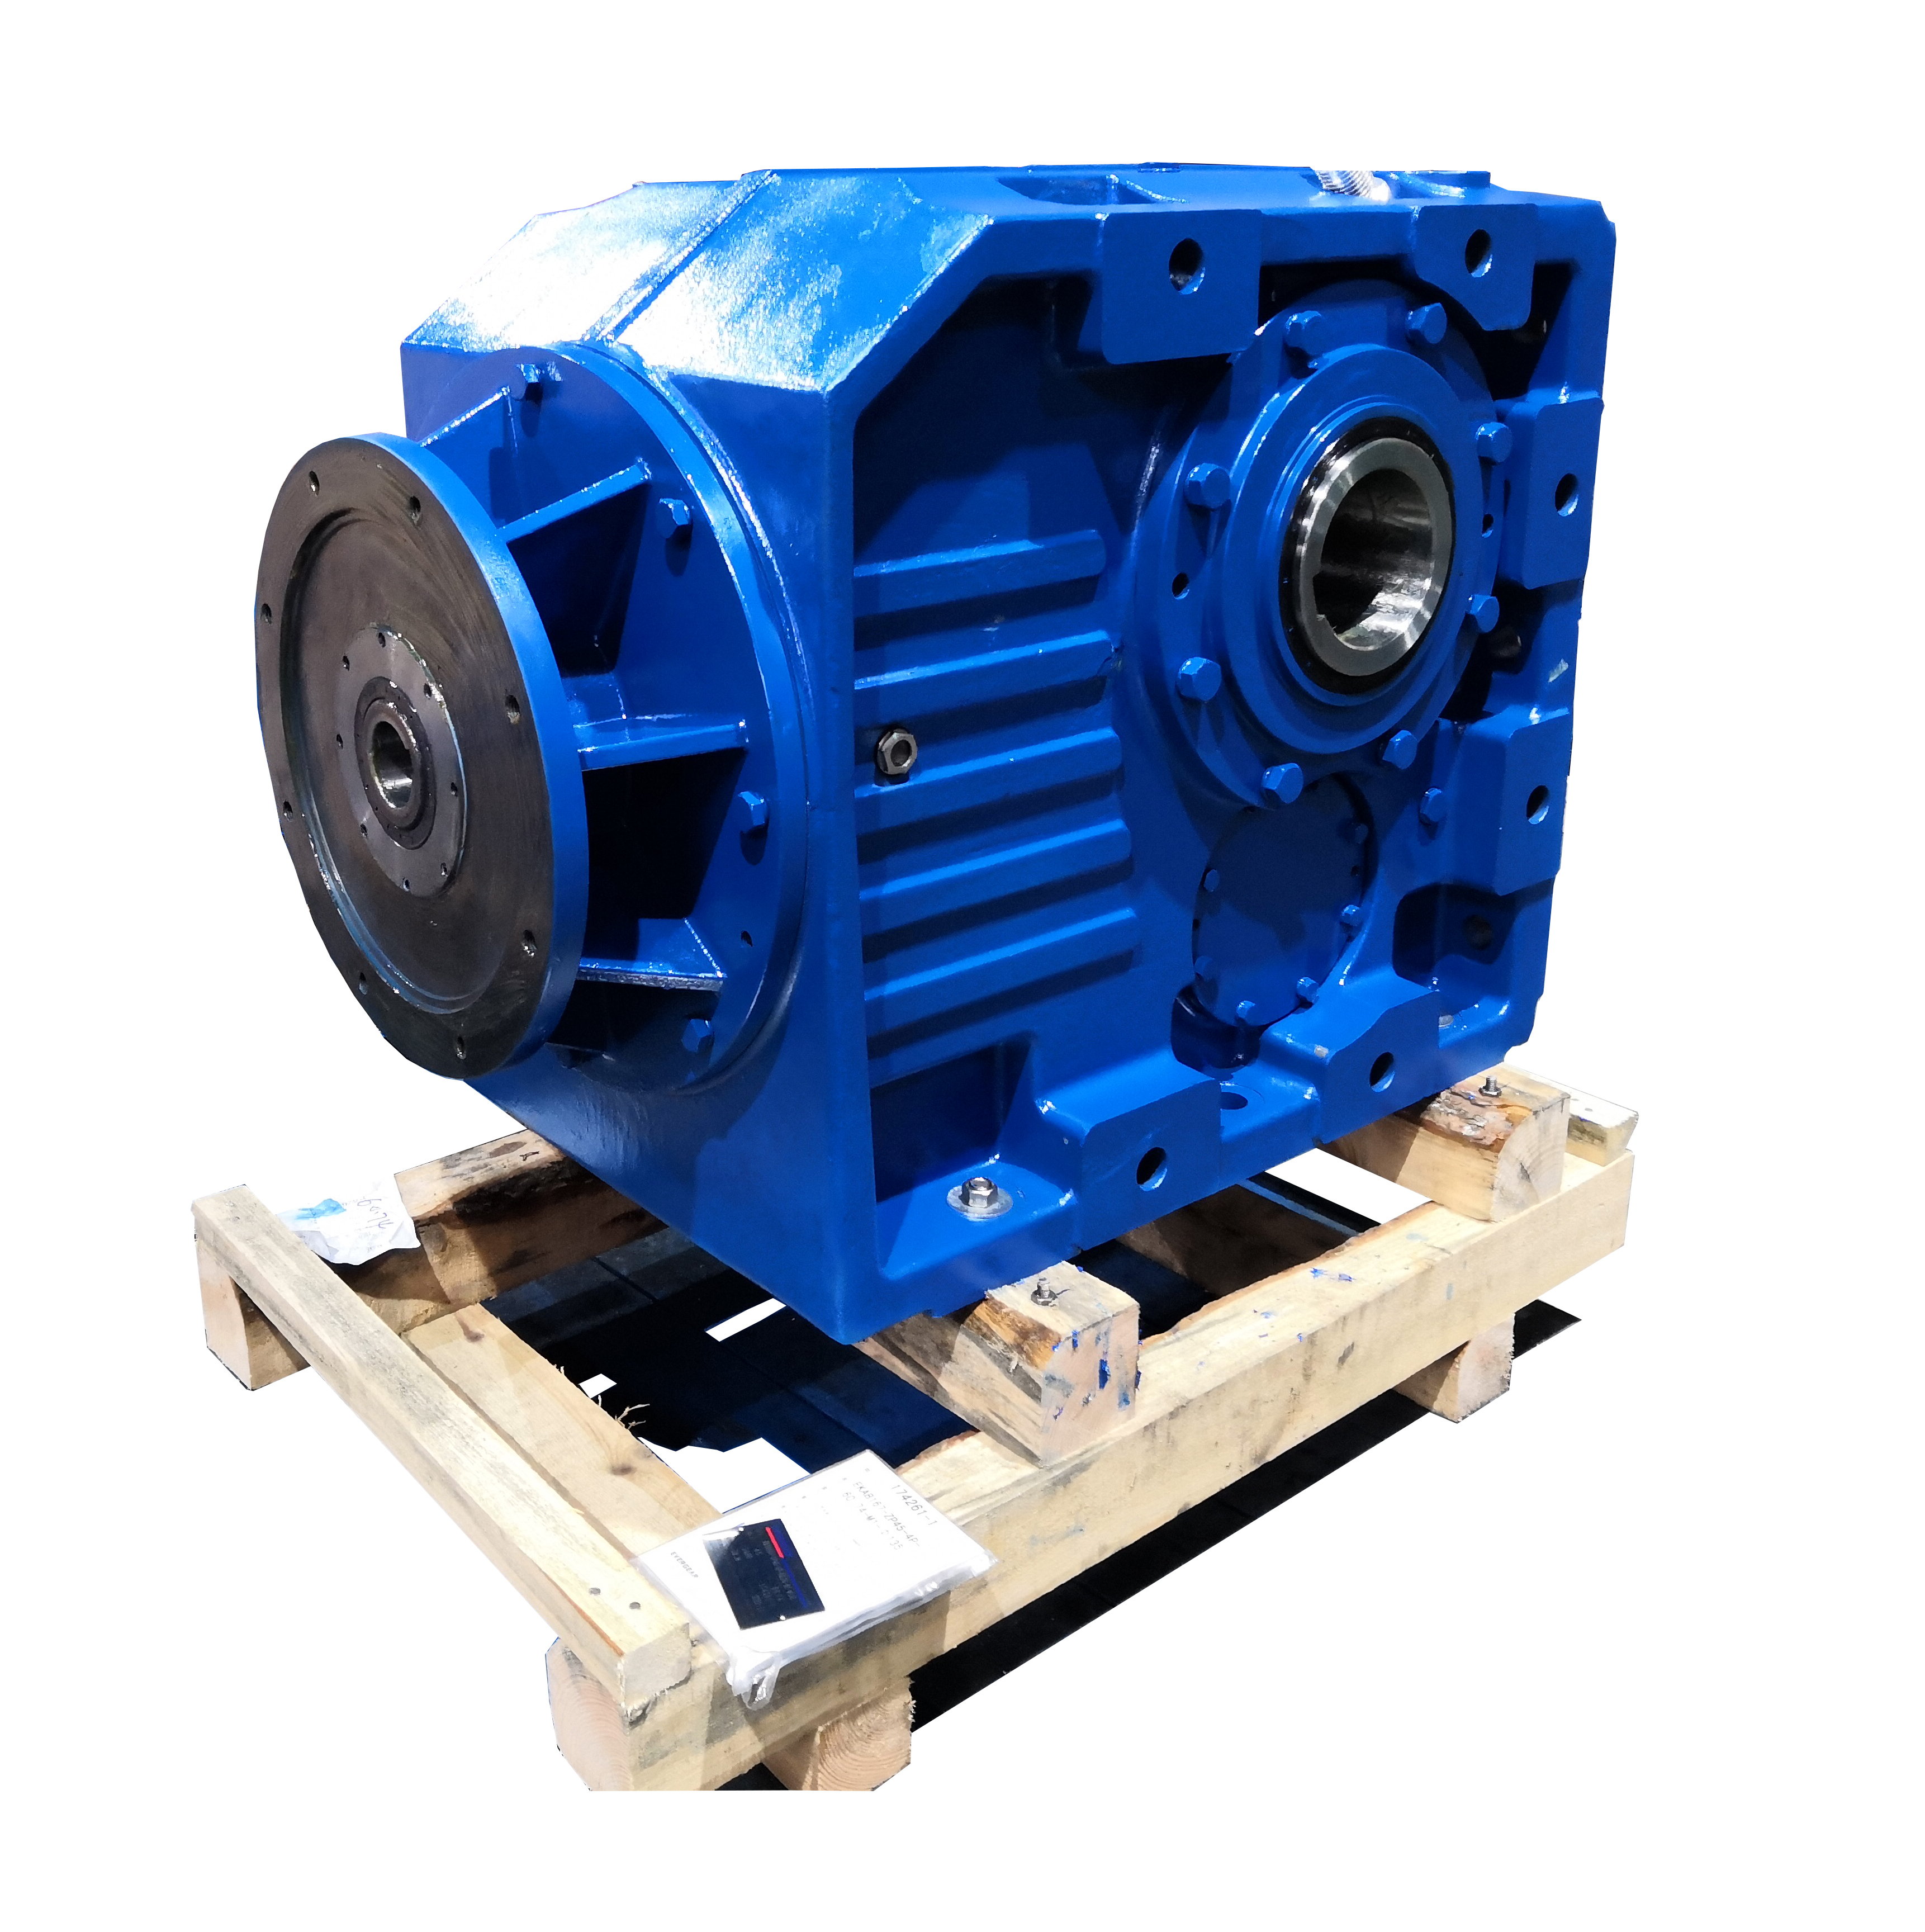 Suitable gearboxes for peristaltic pumps